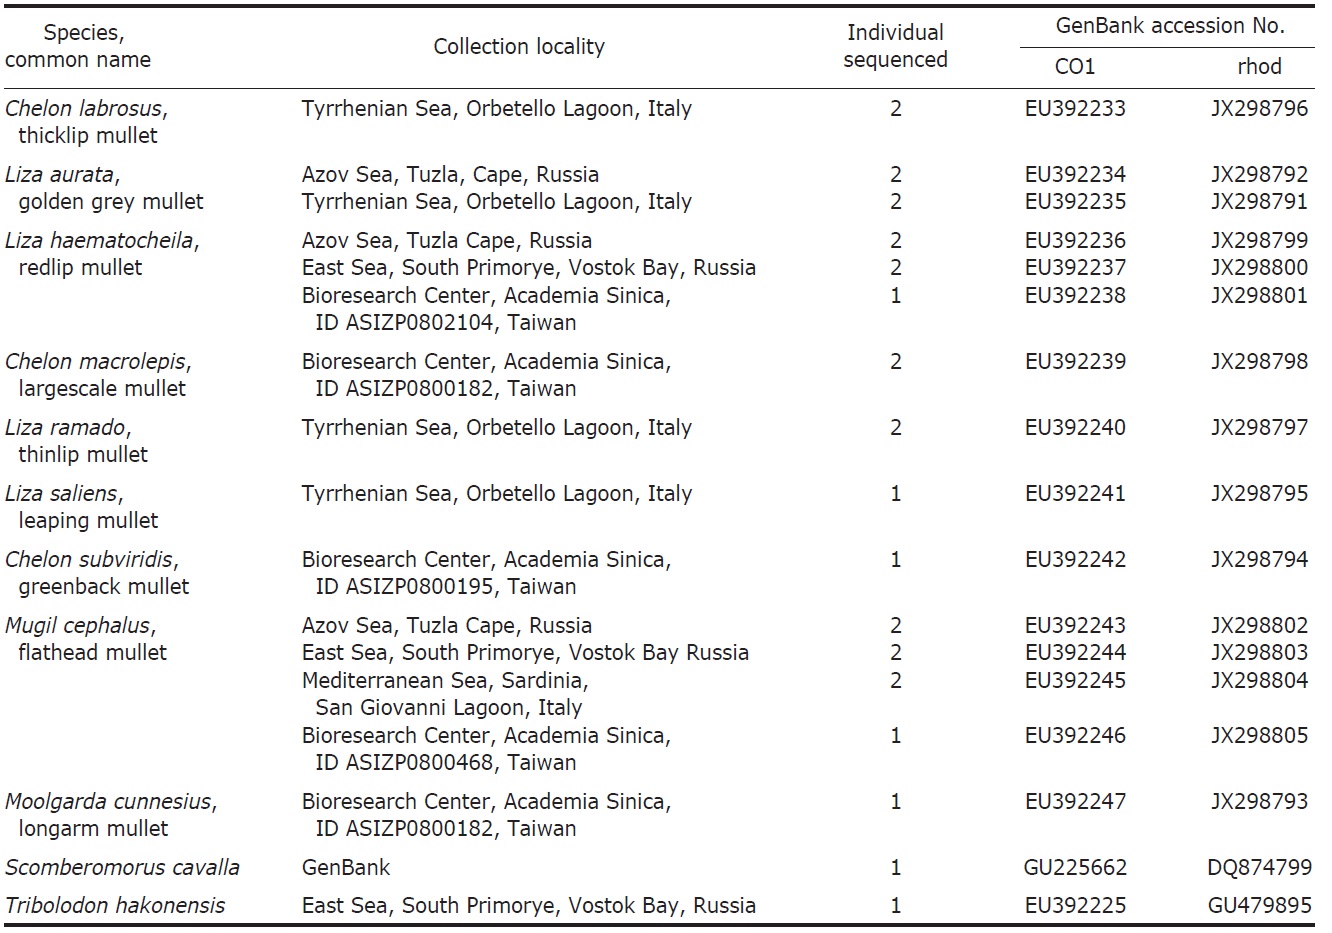 List of Mugilidae species studied with collection locality, number of individuals sequenced, GenBank accession number